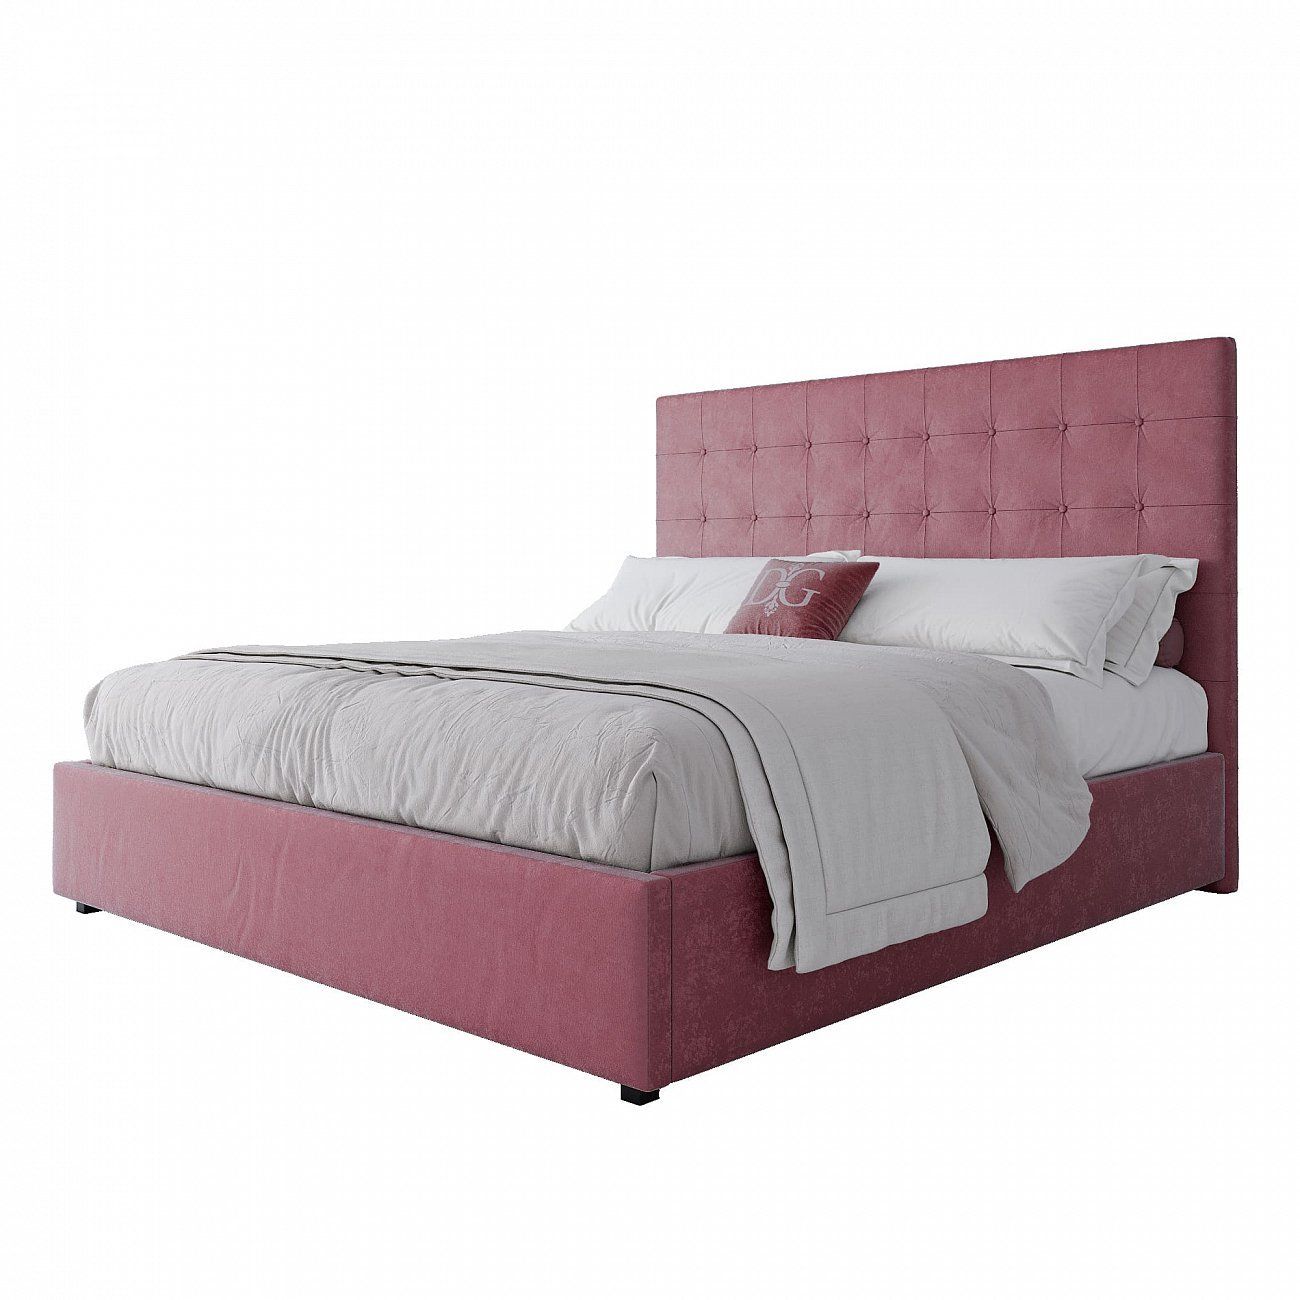 Double Bed 180x200 Dusty Rose Royal Black